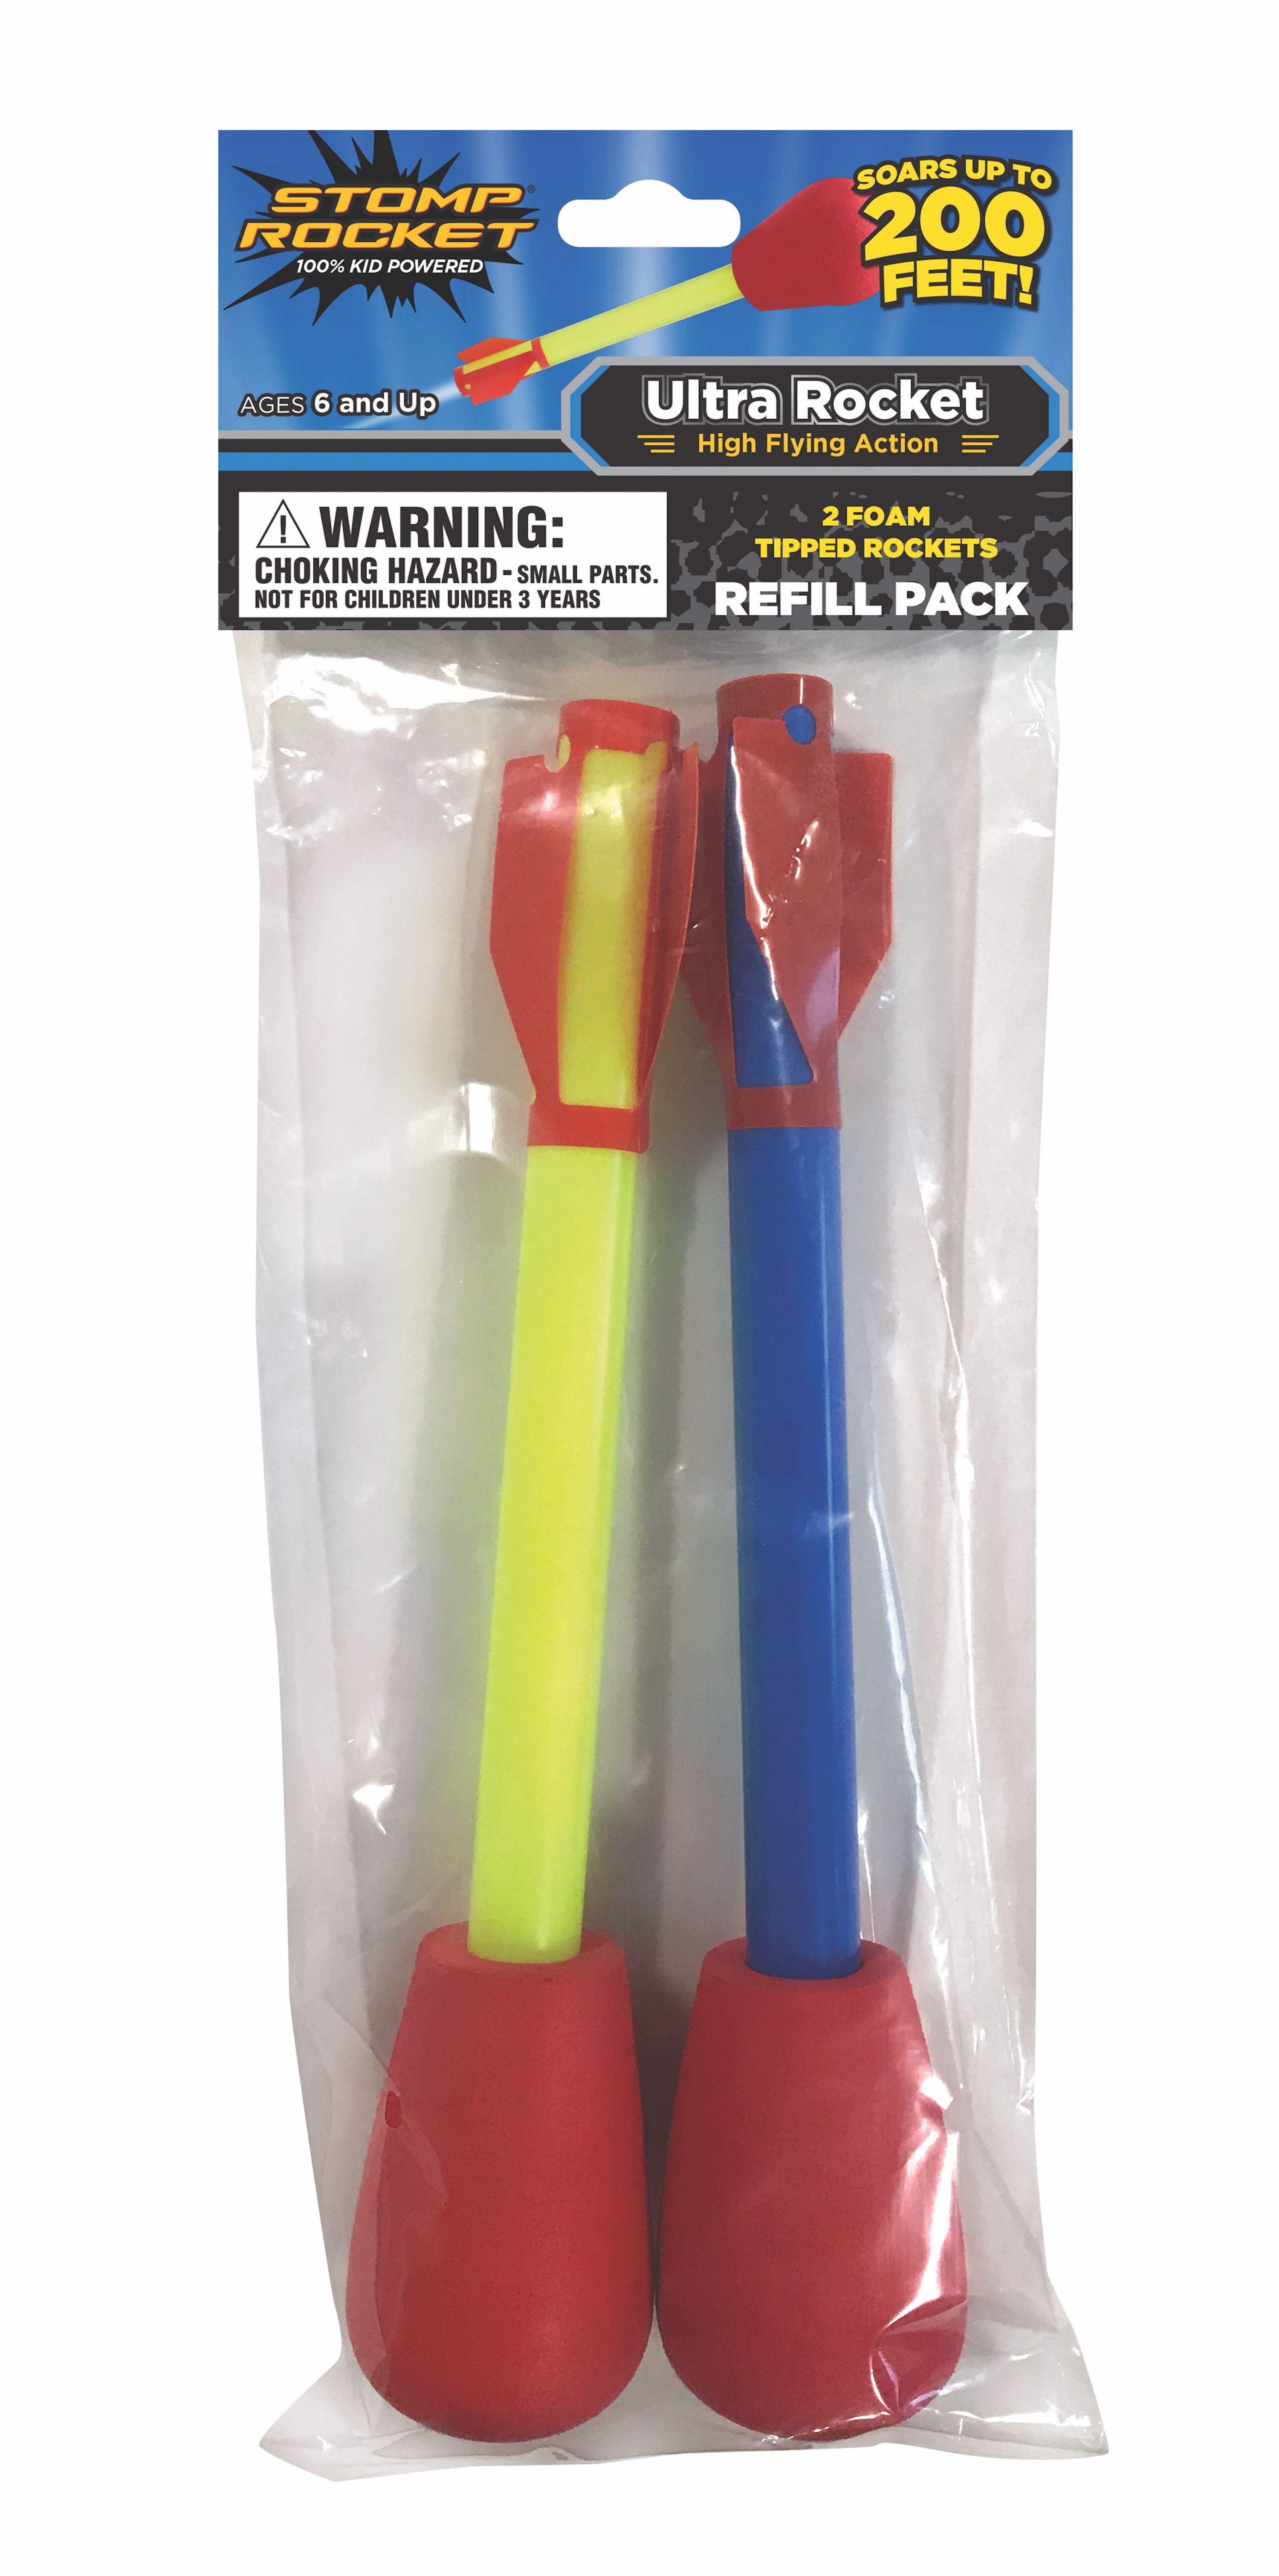 STOMP ROCKET SUPER REFILL PACK FOR AMAZING FUN FAST & FREE DELIVERY 